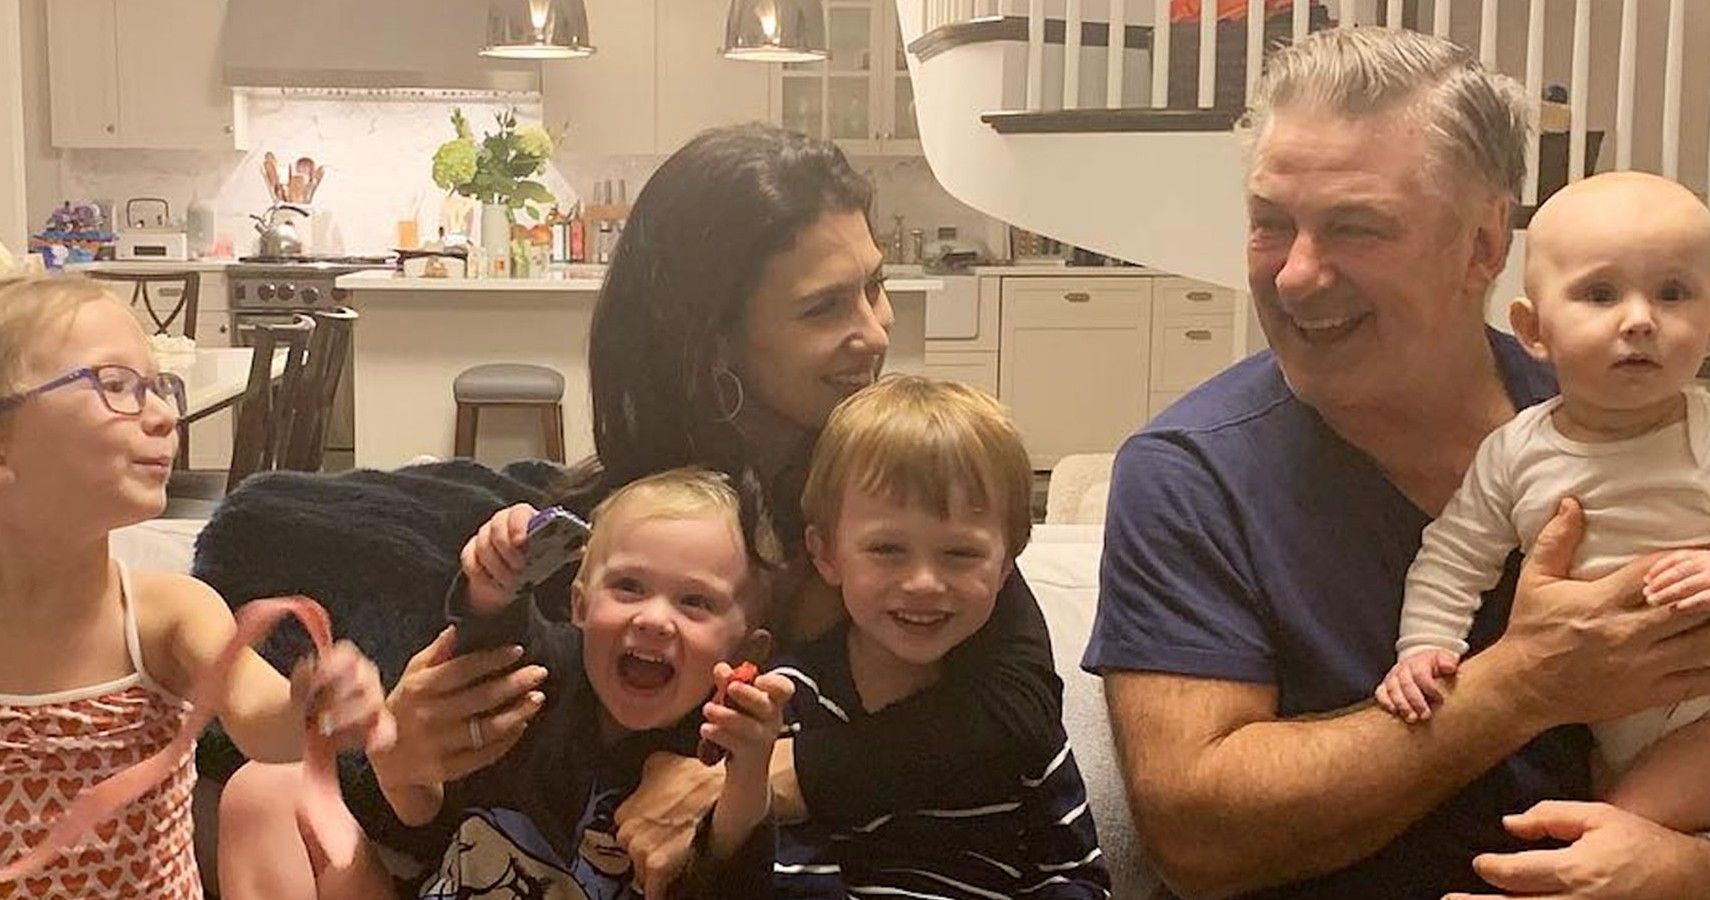 Hilaria Baldwin's Post Generates Fan Conversations About Differences Among Siblings